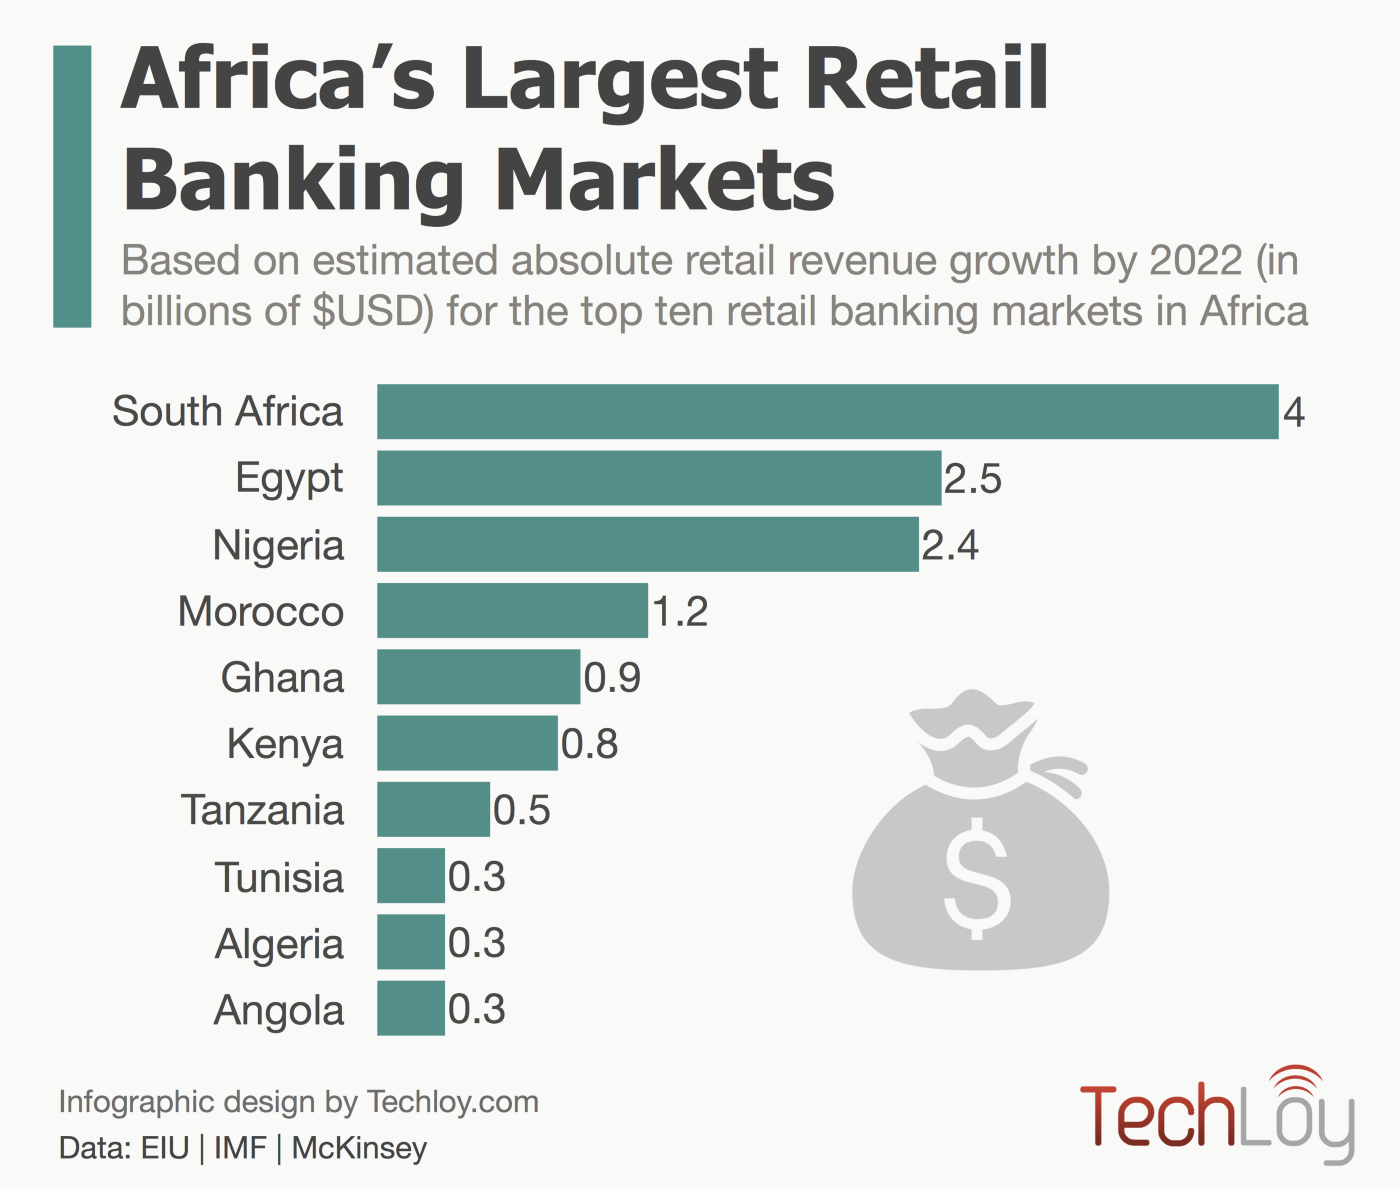 Africa’s top three retail banking markets will account for 50% of revenue growth by 2022